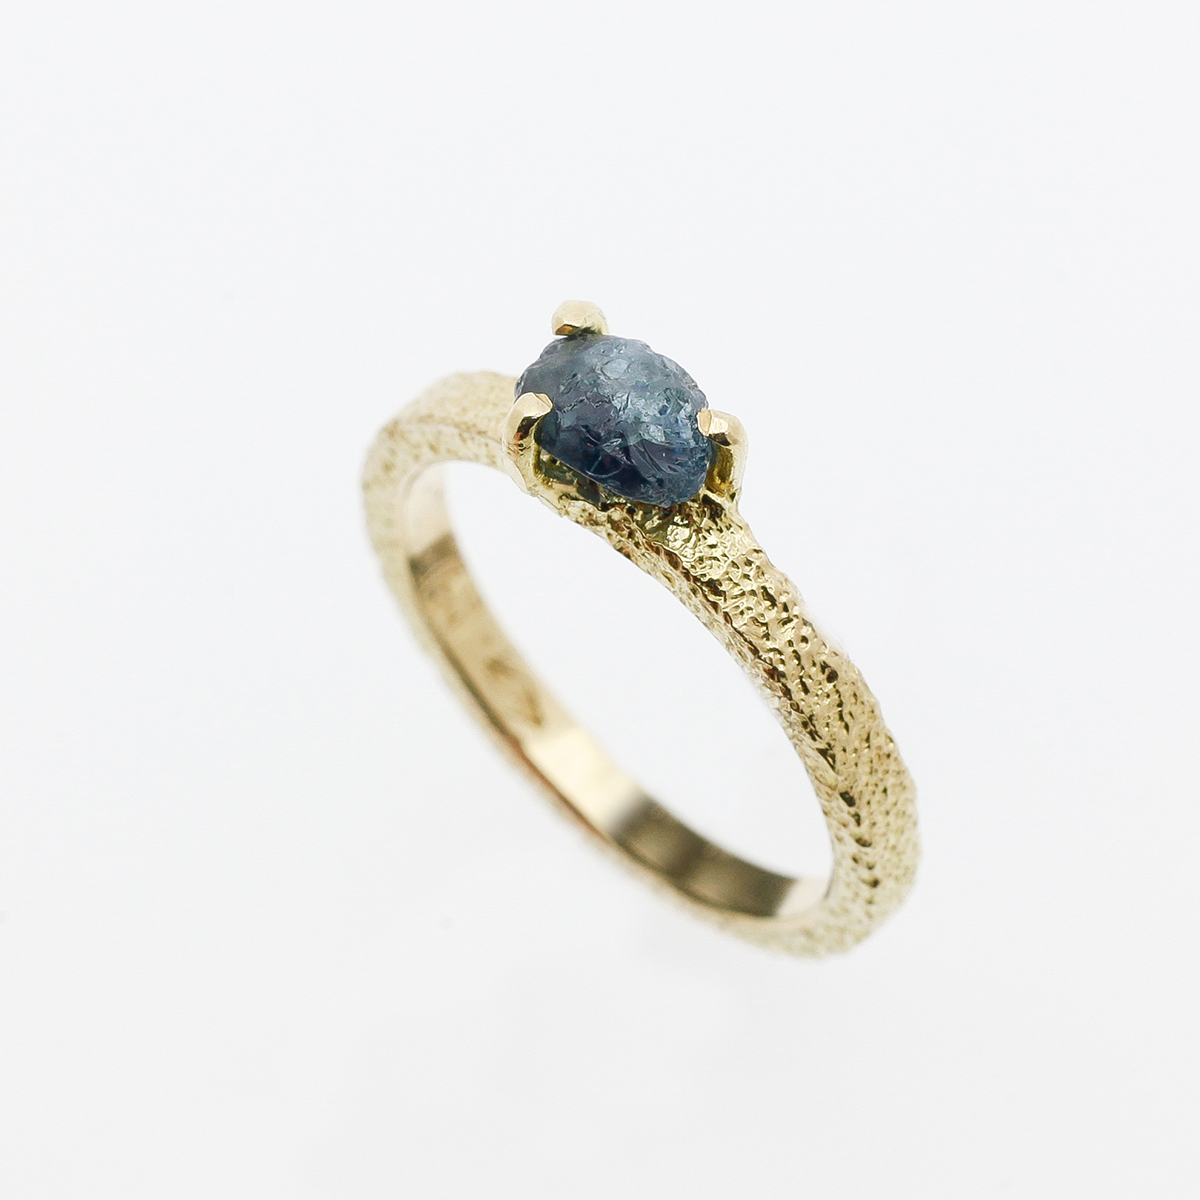 Yellow gold engagement ring with a rough sapphire in a solitaire.